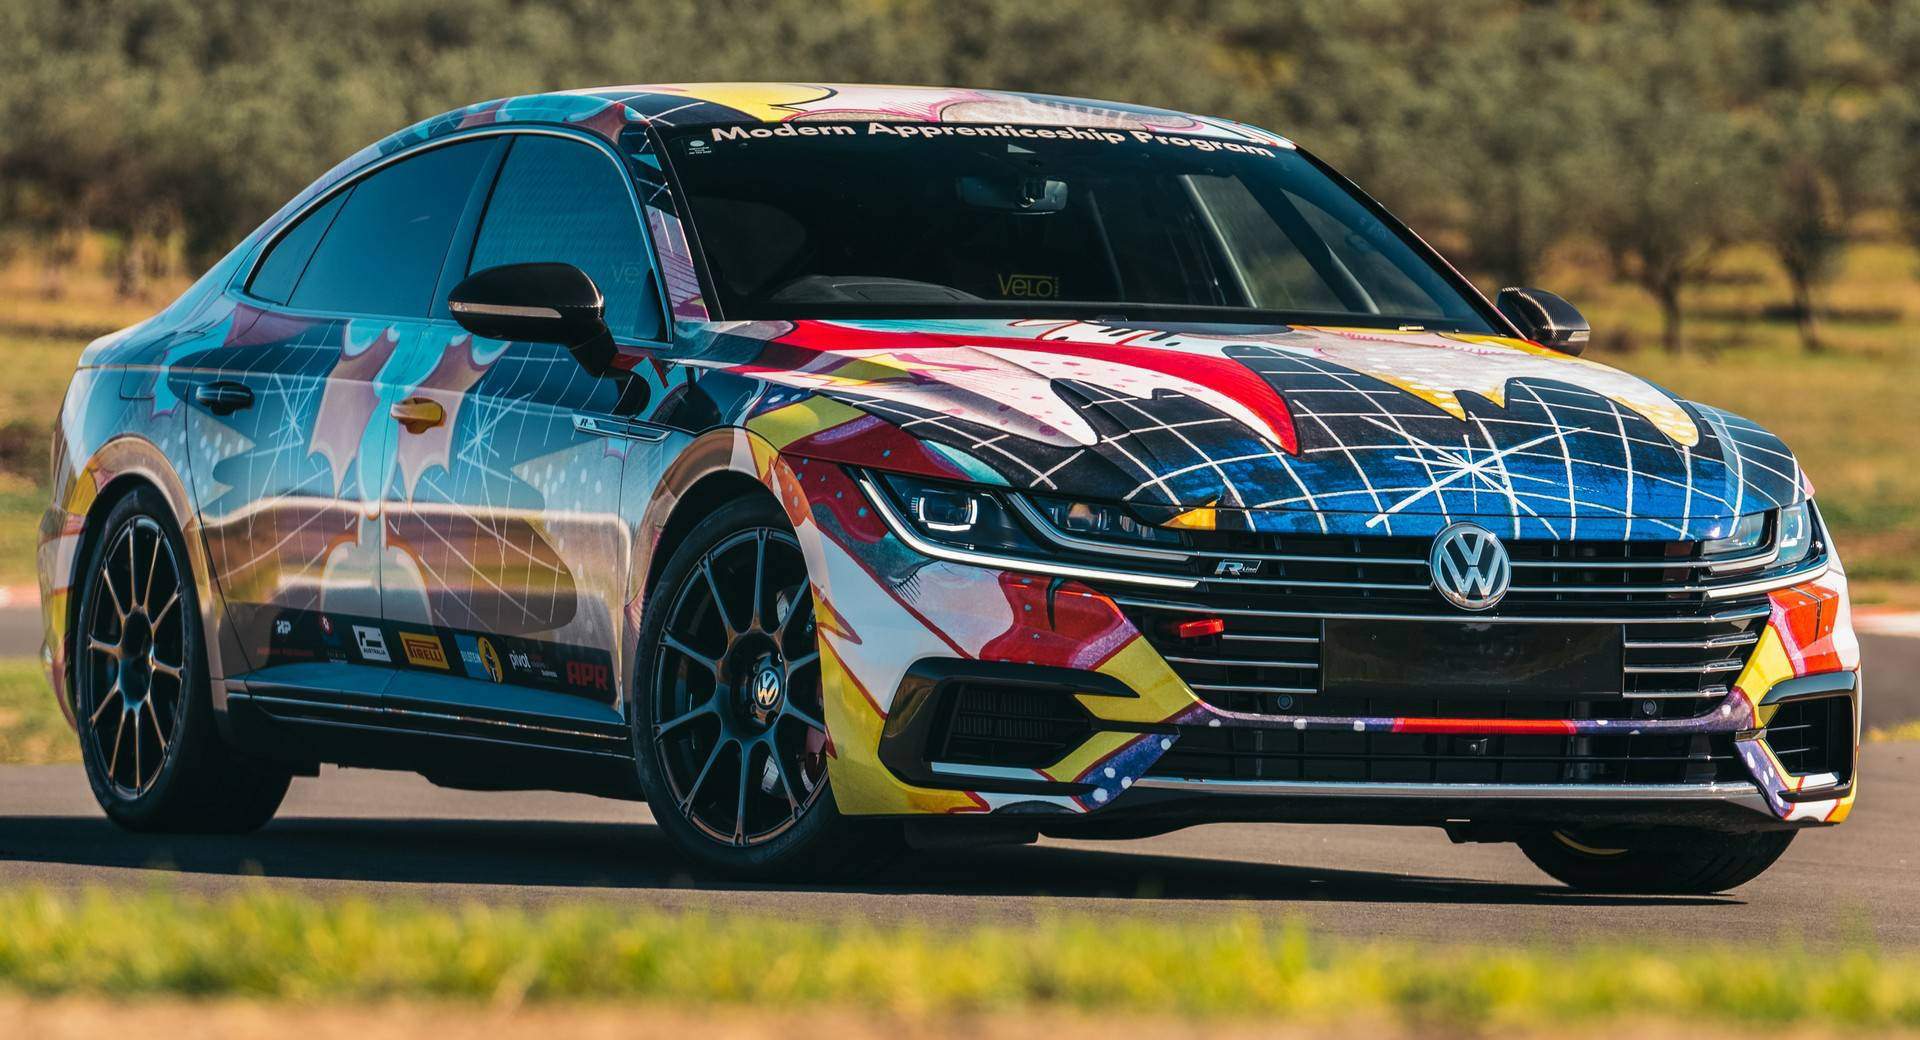 The 316bhp Arteon R is a big, fast, handsome VW